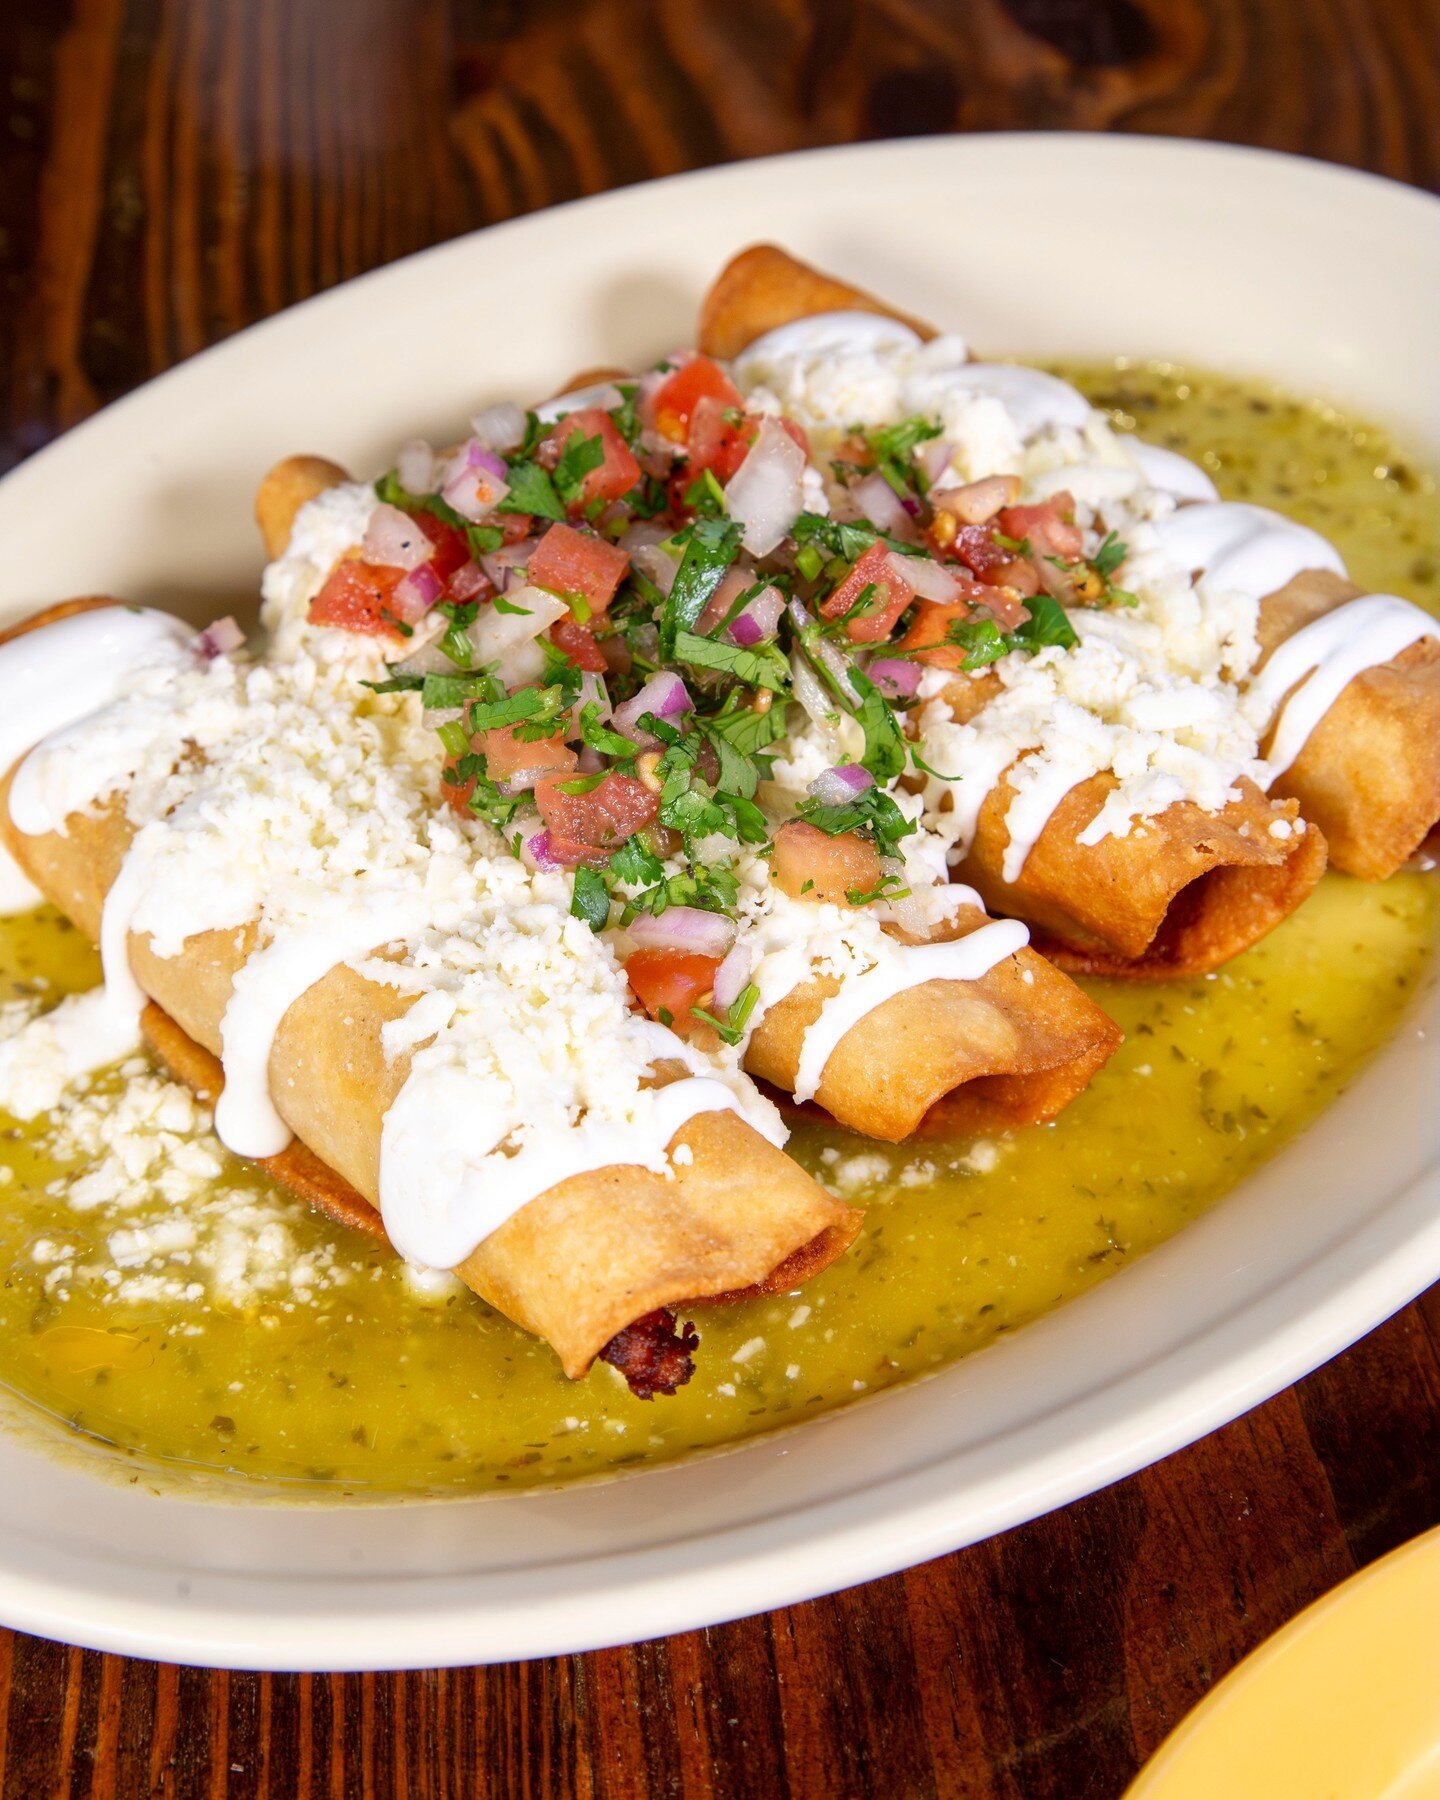 Southern Pines, the taquitos just got an upgrade! 👀

#oraletacobar #taqueria #southernpines #mexicanfood #comidamexicana #southernpinesfood #southernpinesnc